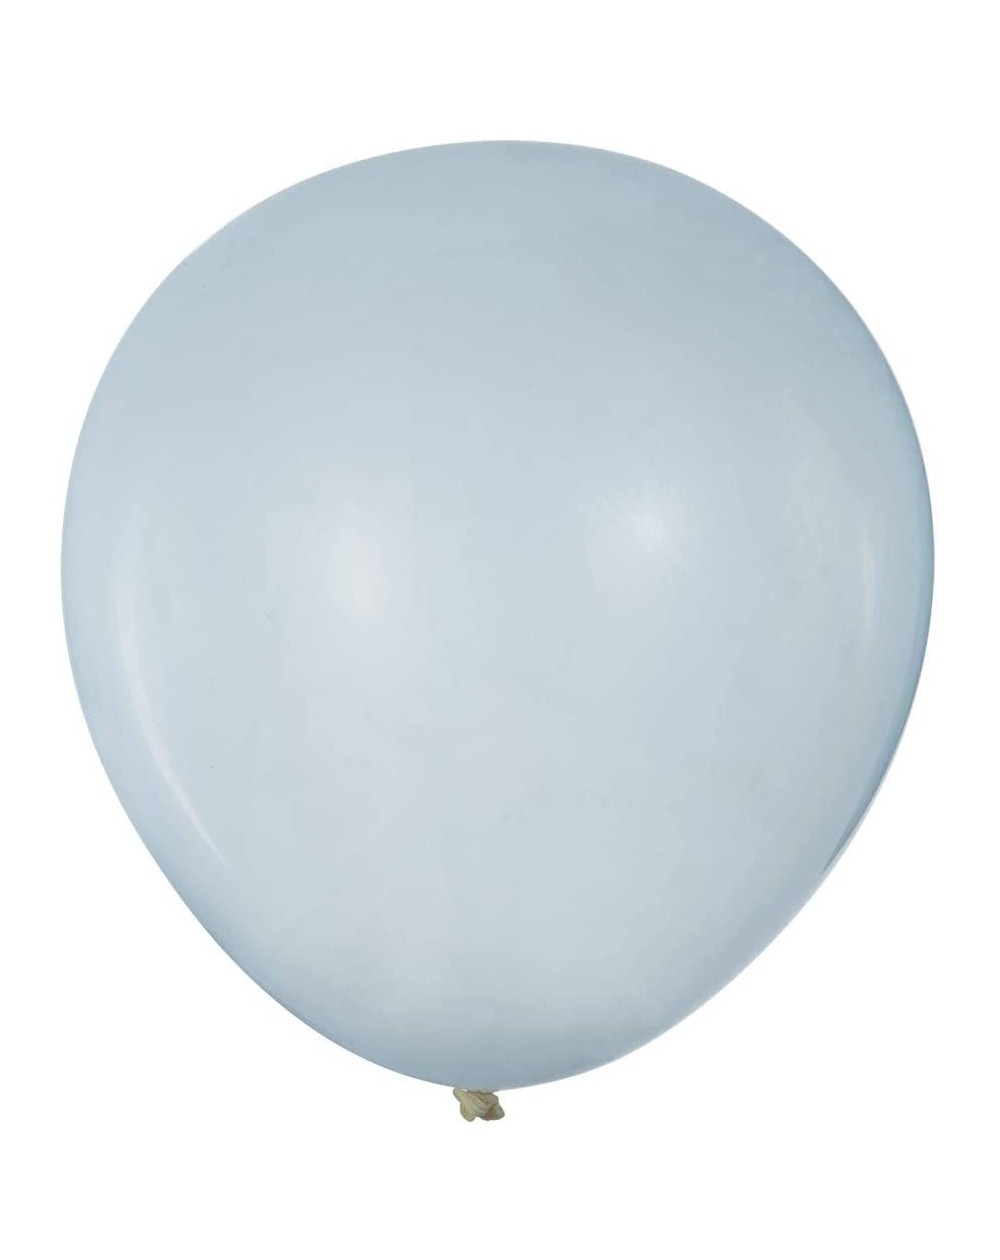 Balloons 36 inch Clear Big Balloons Quality Jumbo Transparent Latex Giant Balloons Party Decorations Pack of 6 - 36"clear - C...